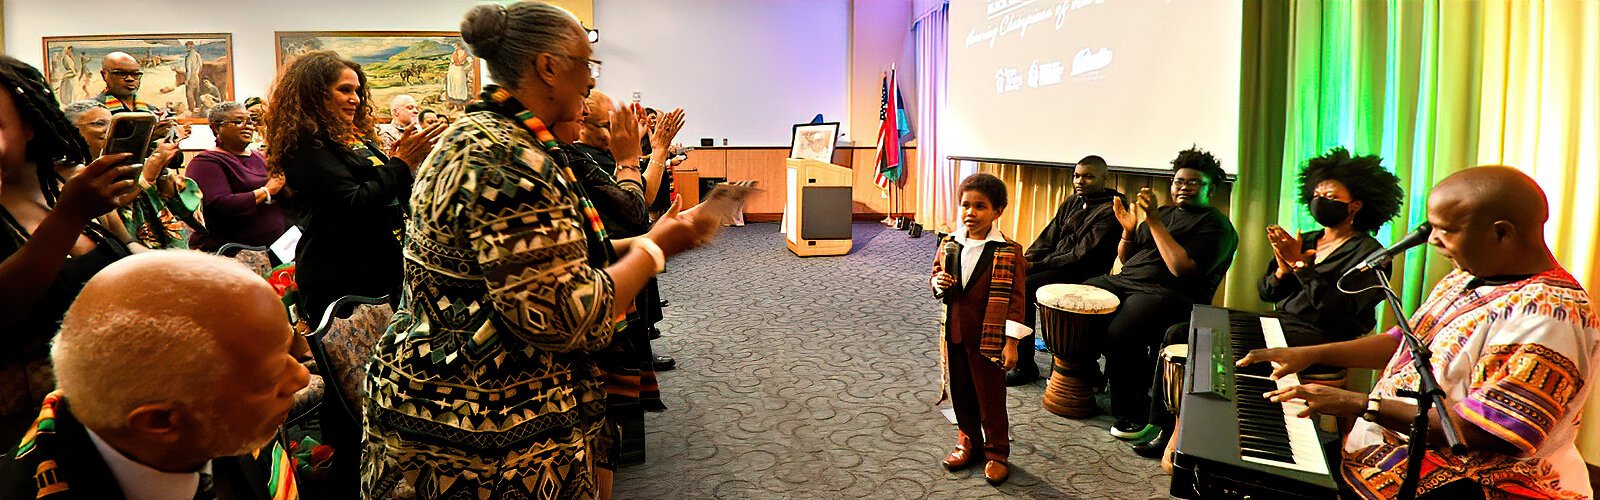 Seven-year-old Avery, a student at the Carlton Burgess School of the Arts, gets a standing ovation after singing two songs about Dr. Martin Luther King Jr. and freedom. He was accompanied on piano by Carlton Burgess.